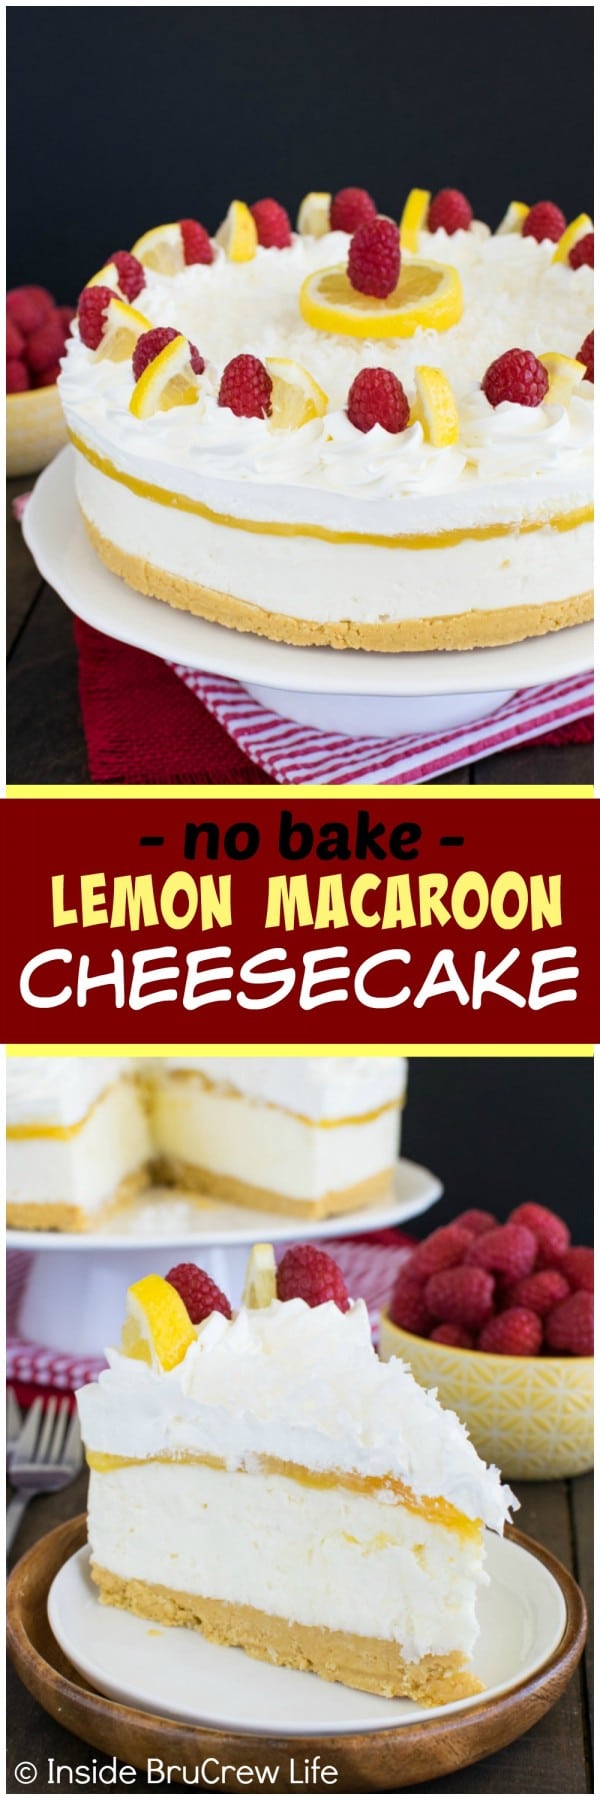 No oven is needed to make this awesome layered No Bake Lemon Macaroon Cheesecake recipe. You will love the cookies, lemon curd, and creamy cheesecake!